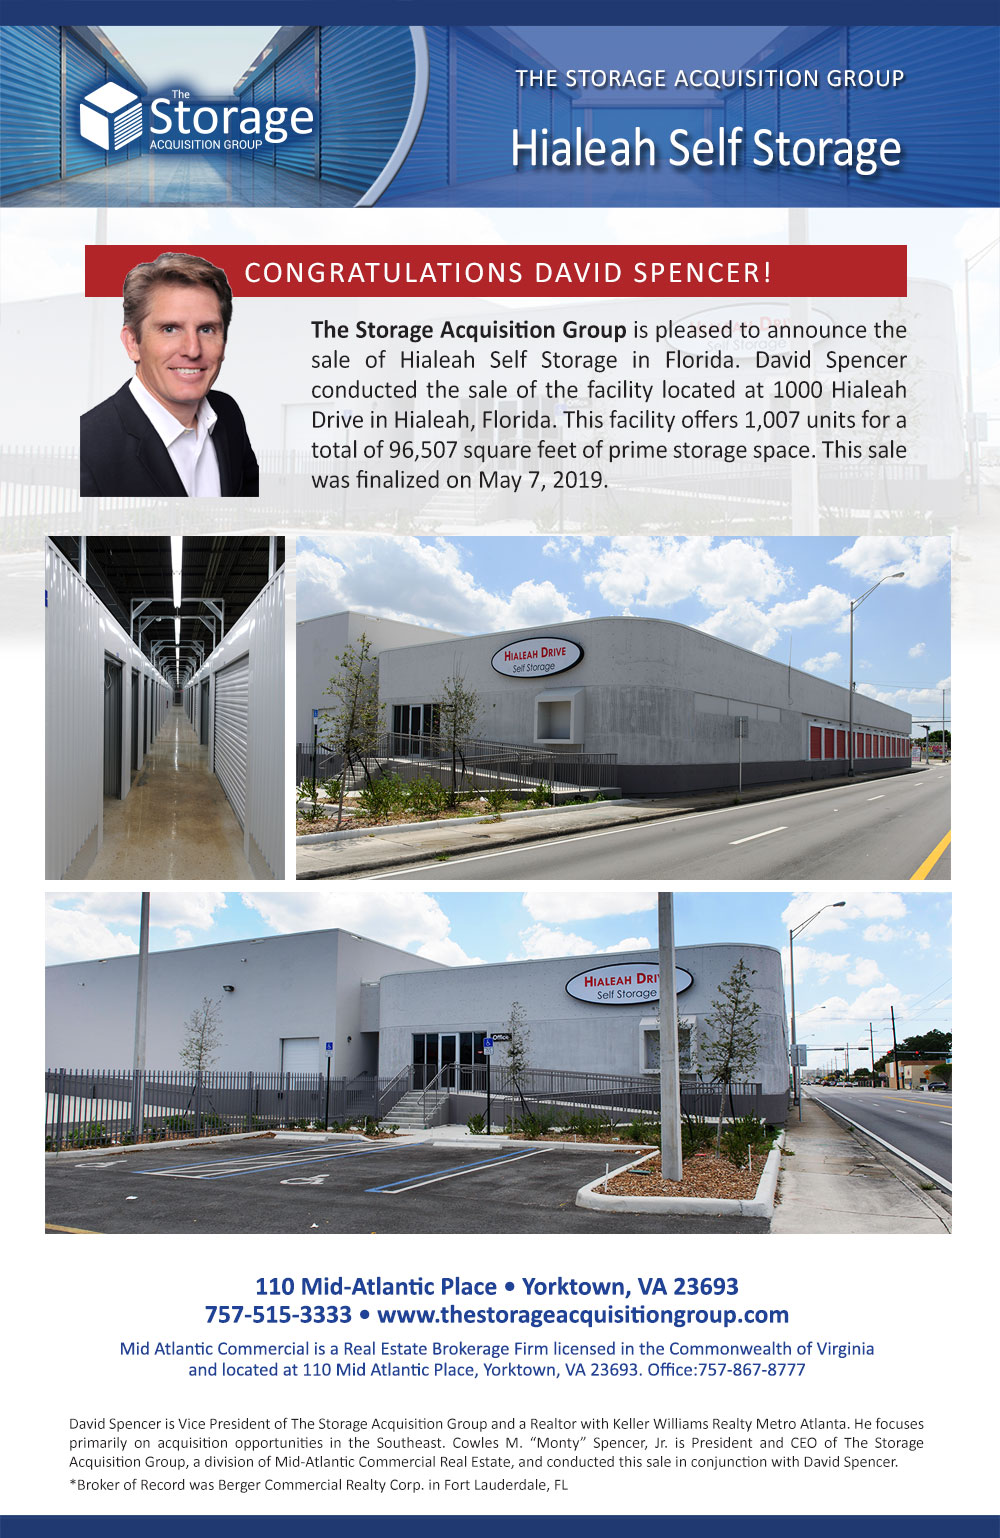 Fred Paris - Vice President - The Storage Acquisition Group